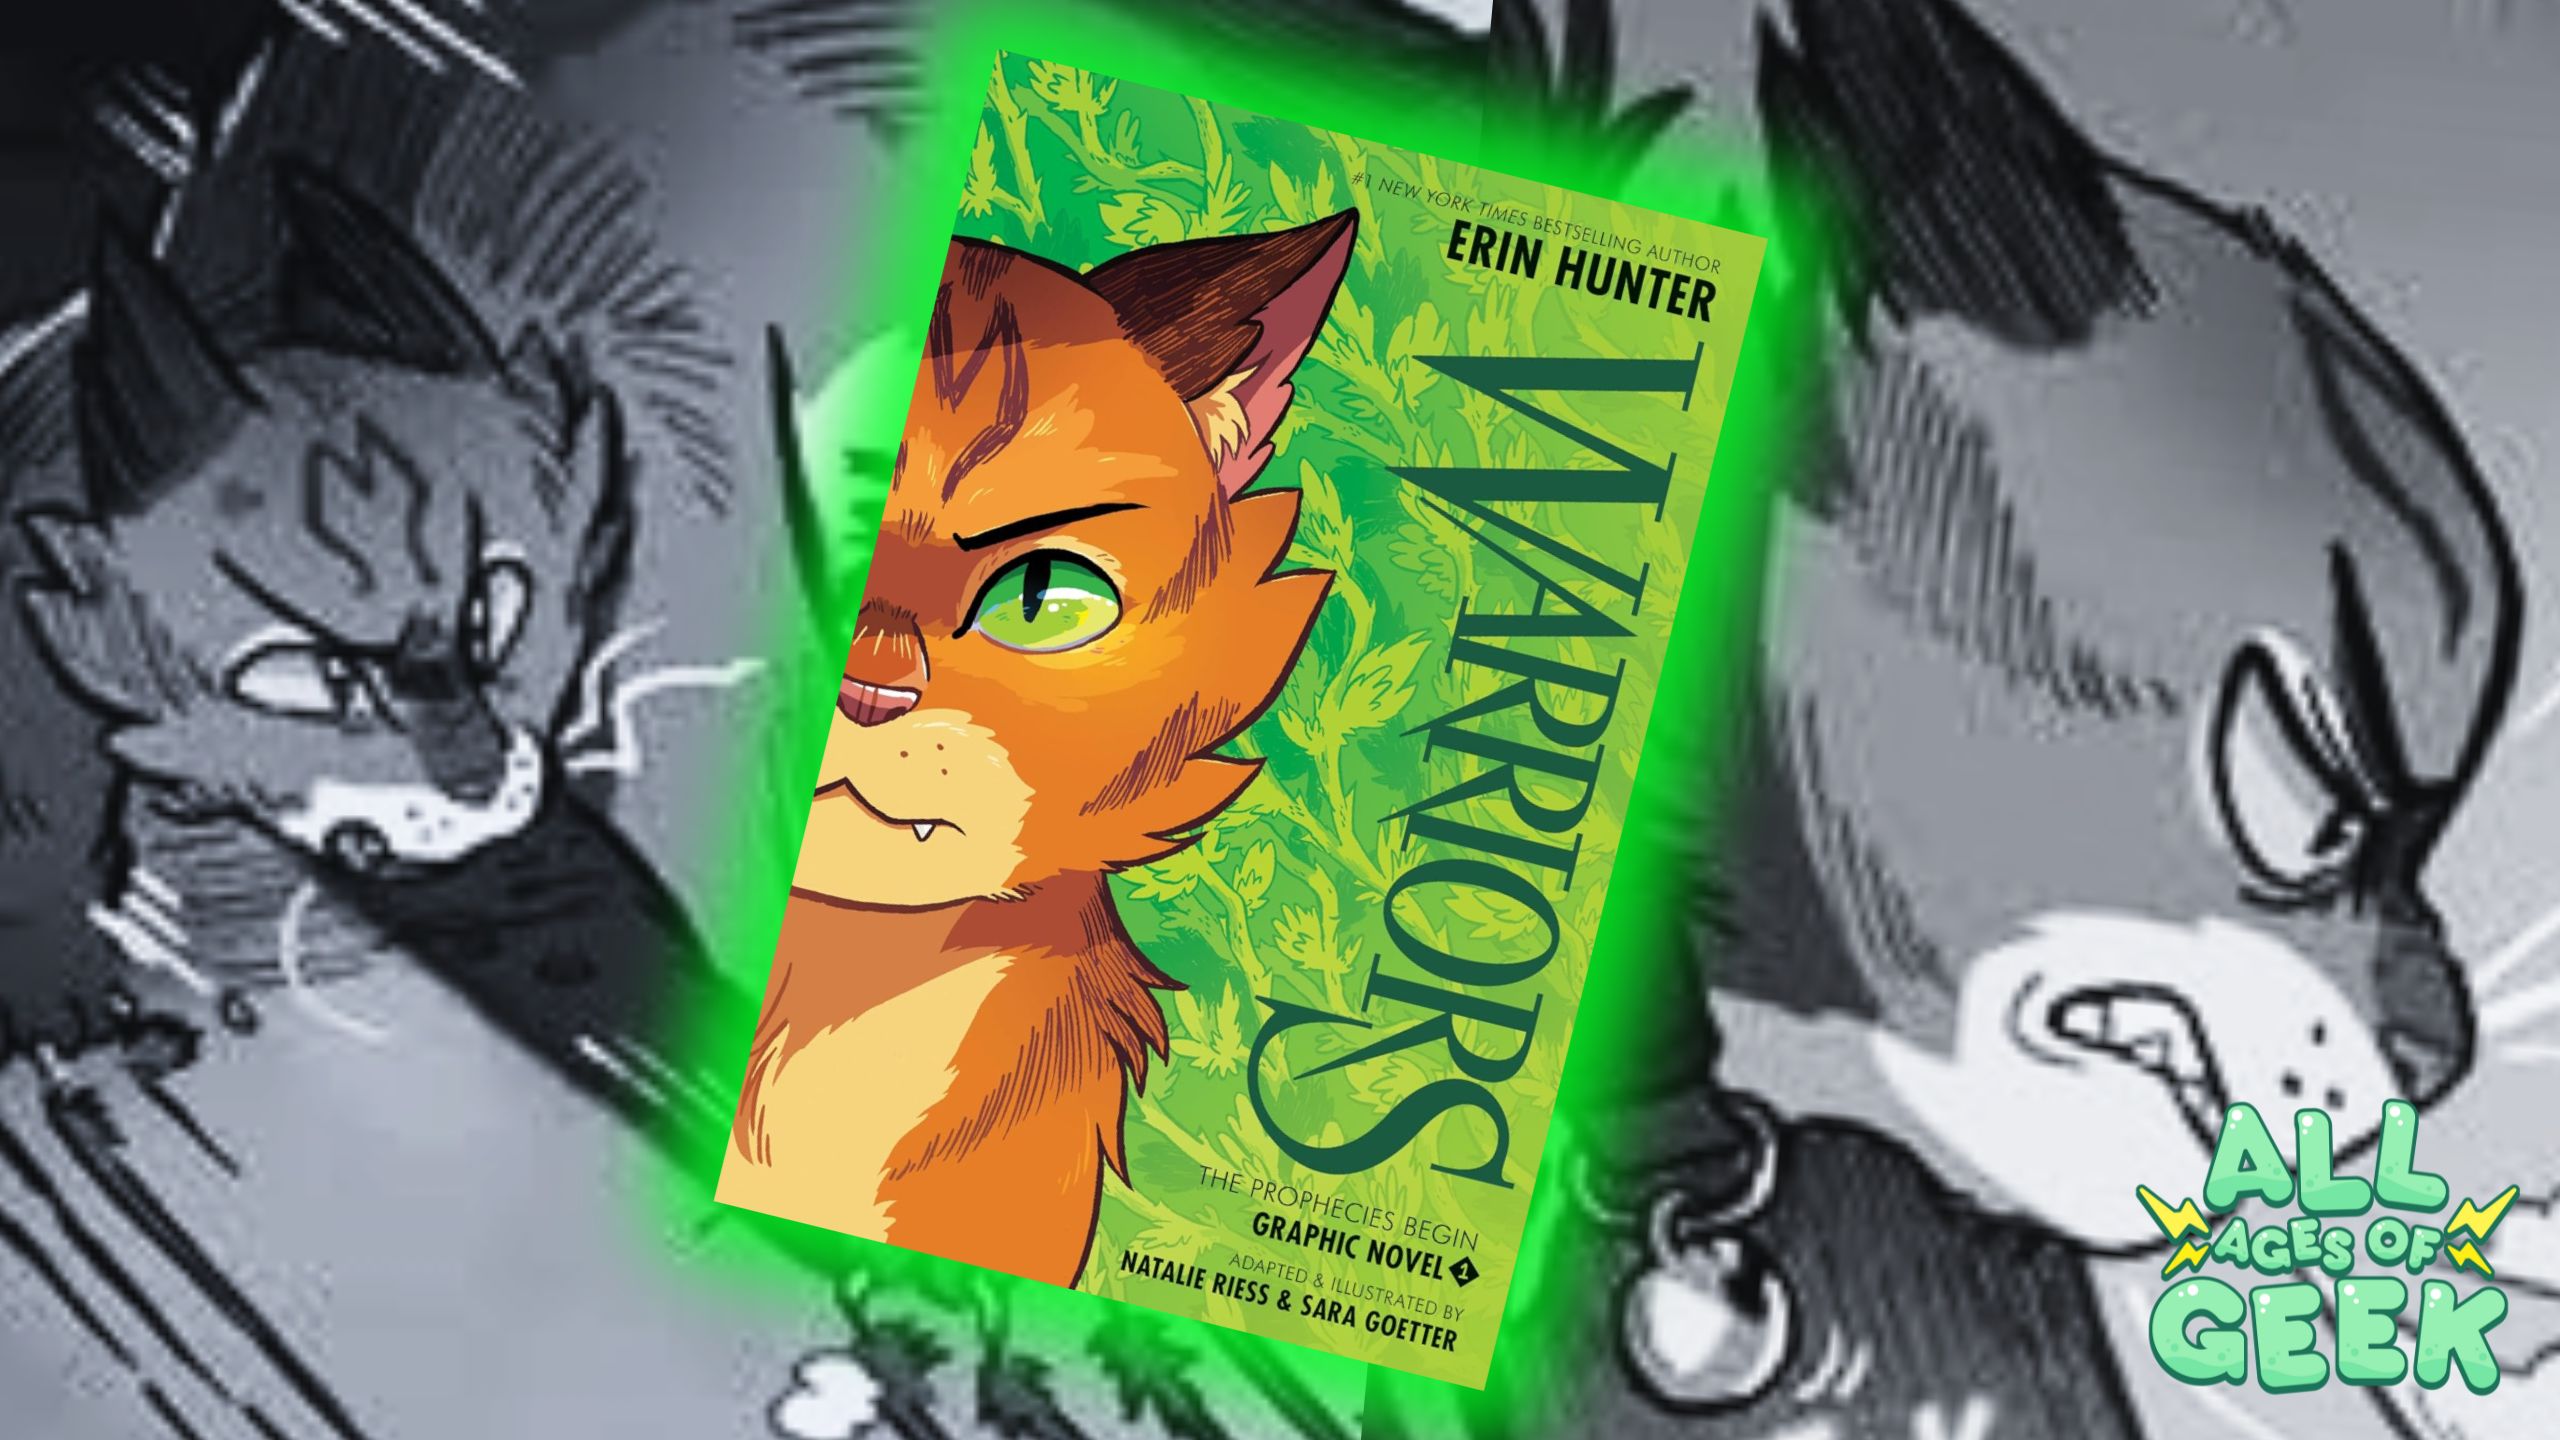 Warrior Cats graphic novel cover featuring a close-up of a determined cat with green eyes and orange fur. The background showcases intense action scenes in black and white, with the All Ages of Geek logo in the bottom right corner